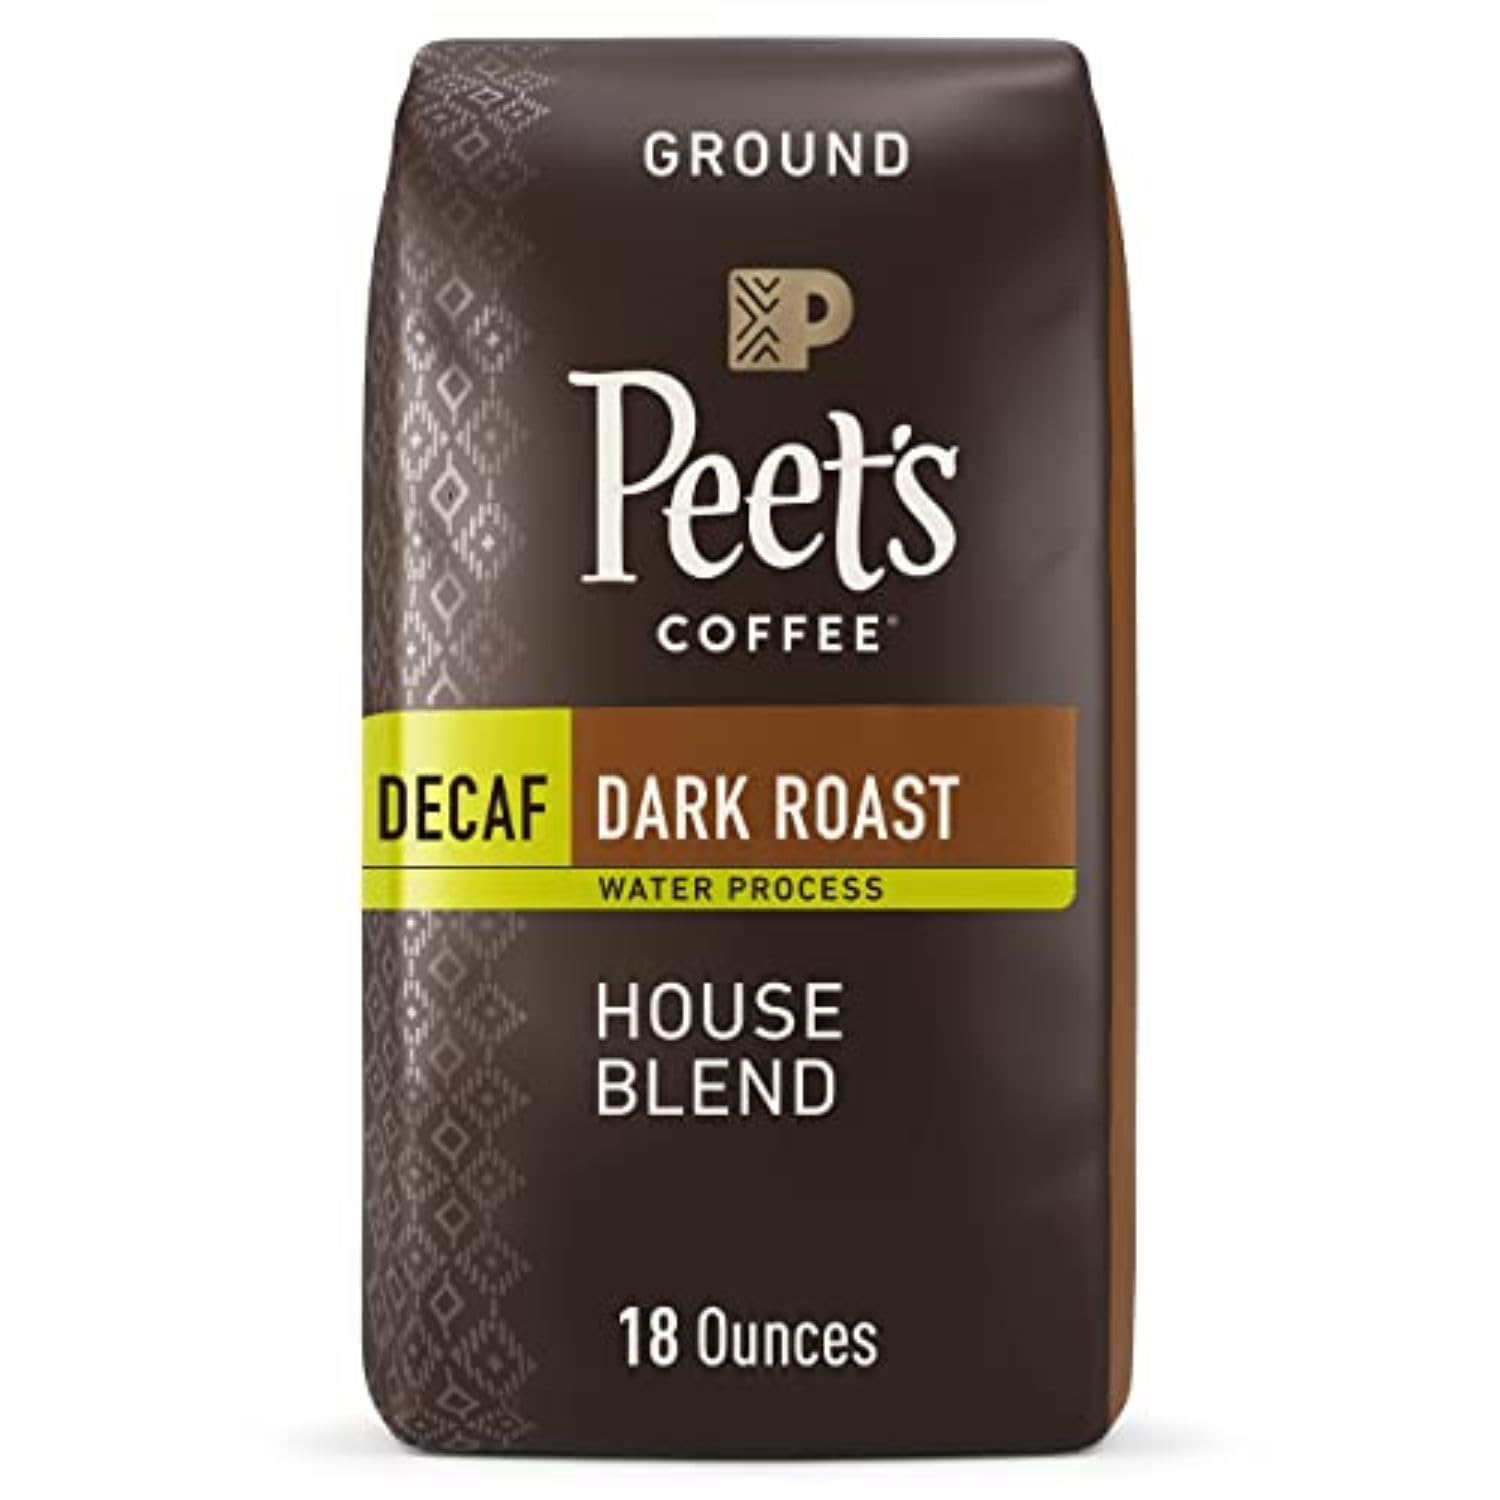 This is really good decaf! I thought the reviews might be too good to be true, but nope, it was very tasty and I couldn't tell it was decaf. 